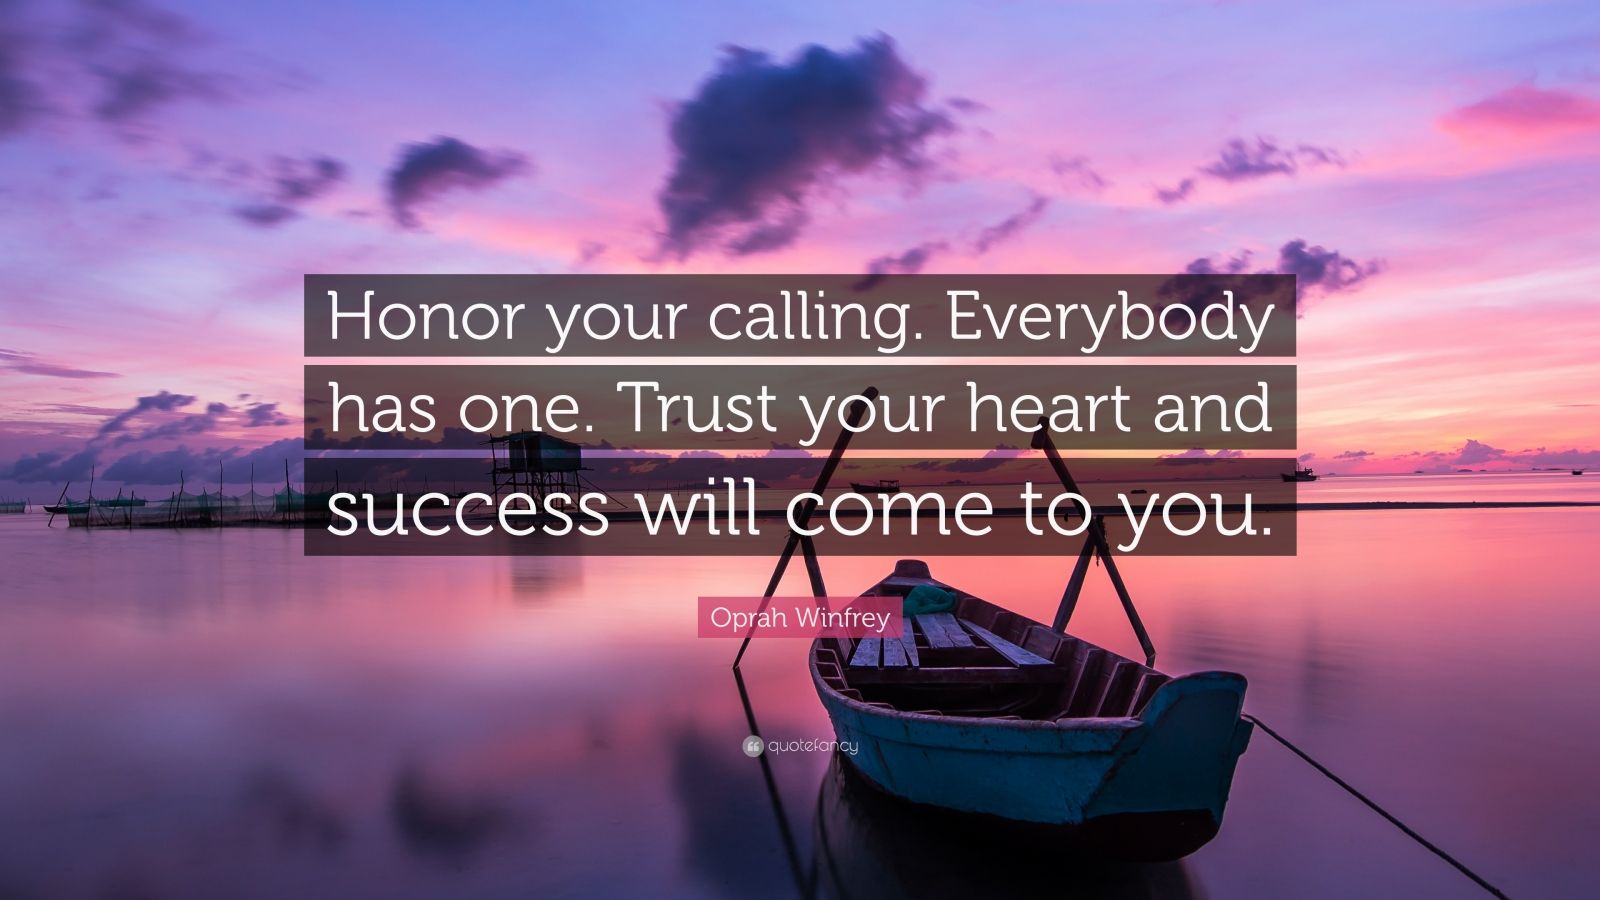 Oprah Winfrey Quote: “Honor your calling. Everybody has one. Trust your